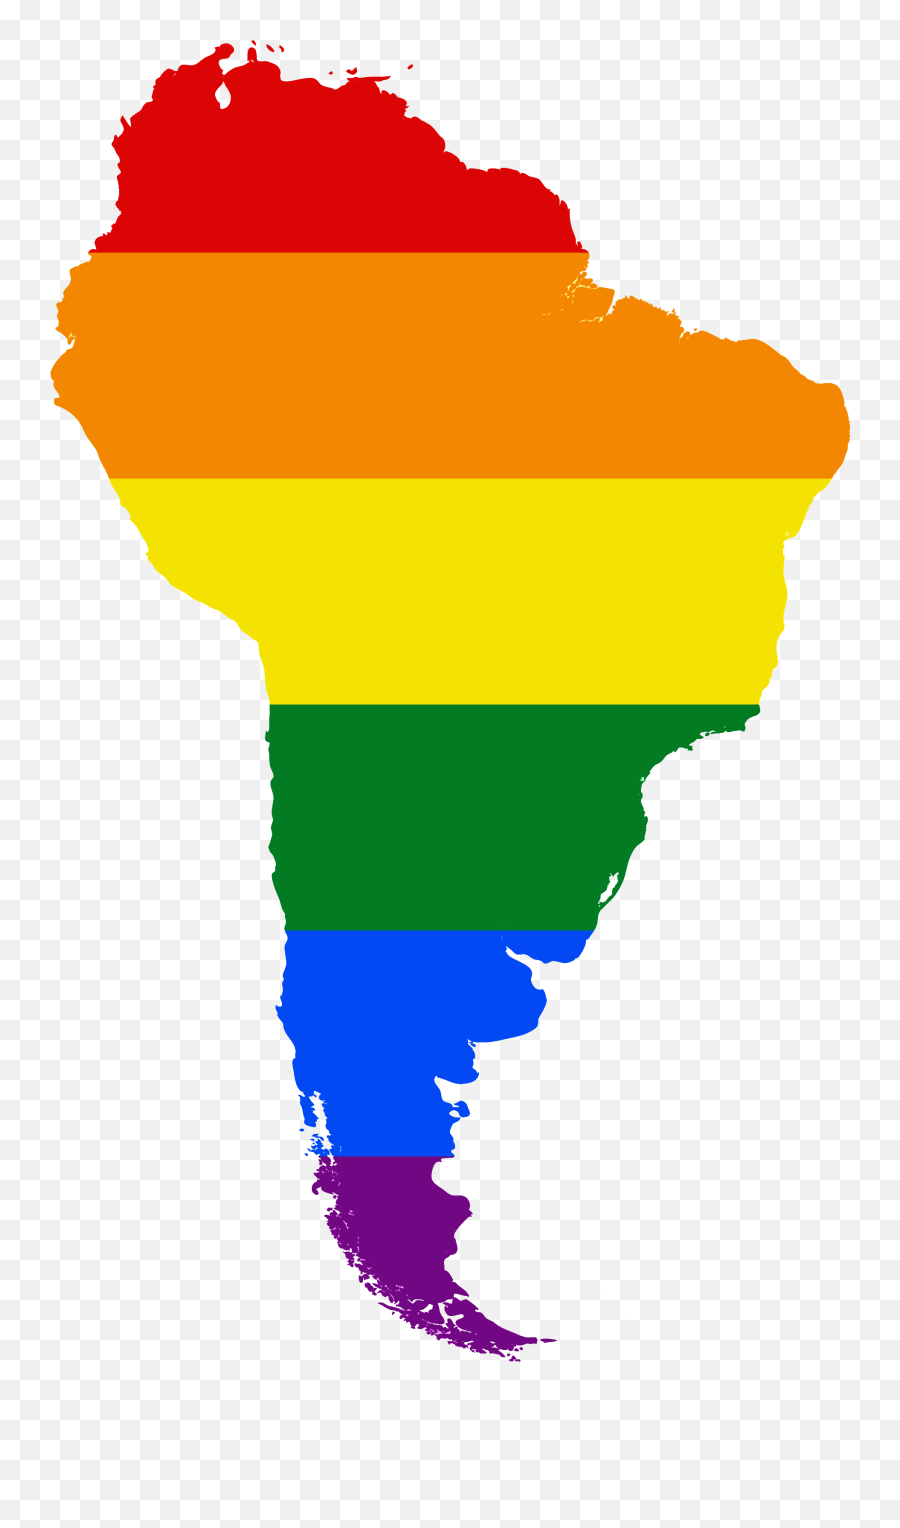 Download Free Png Lgbt Image - Dlpngcom South America Alternate History Maps,Gay Pride Flag Png